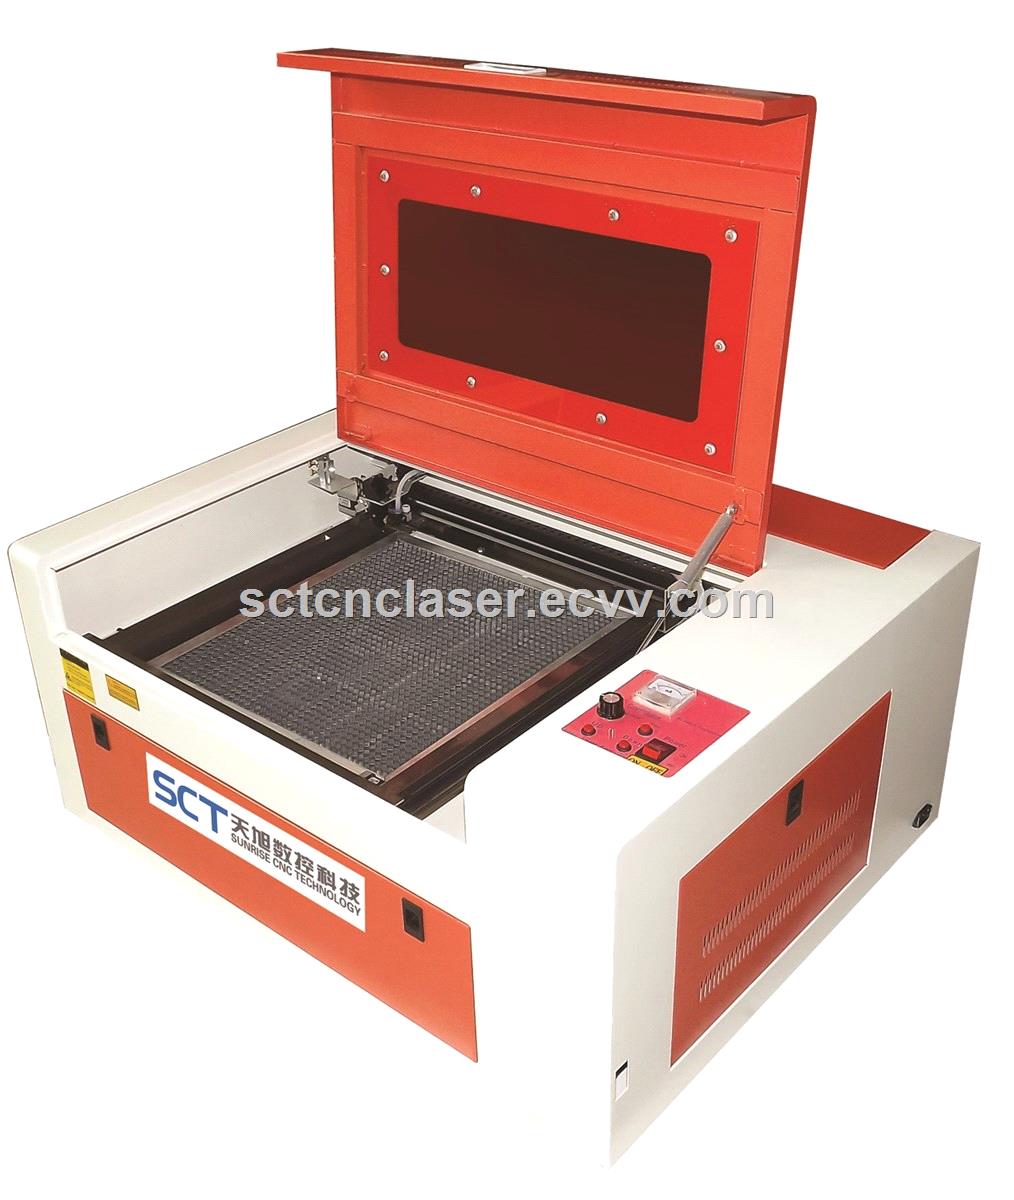 CNC Laser Engraving Machine for Signs and Advertising